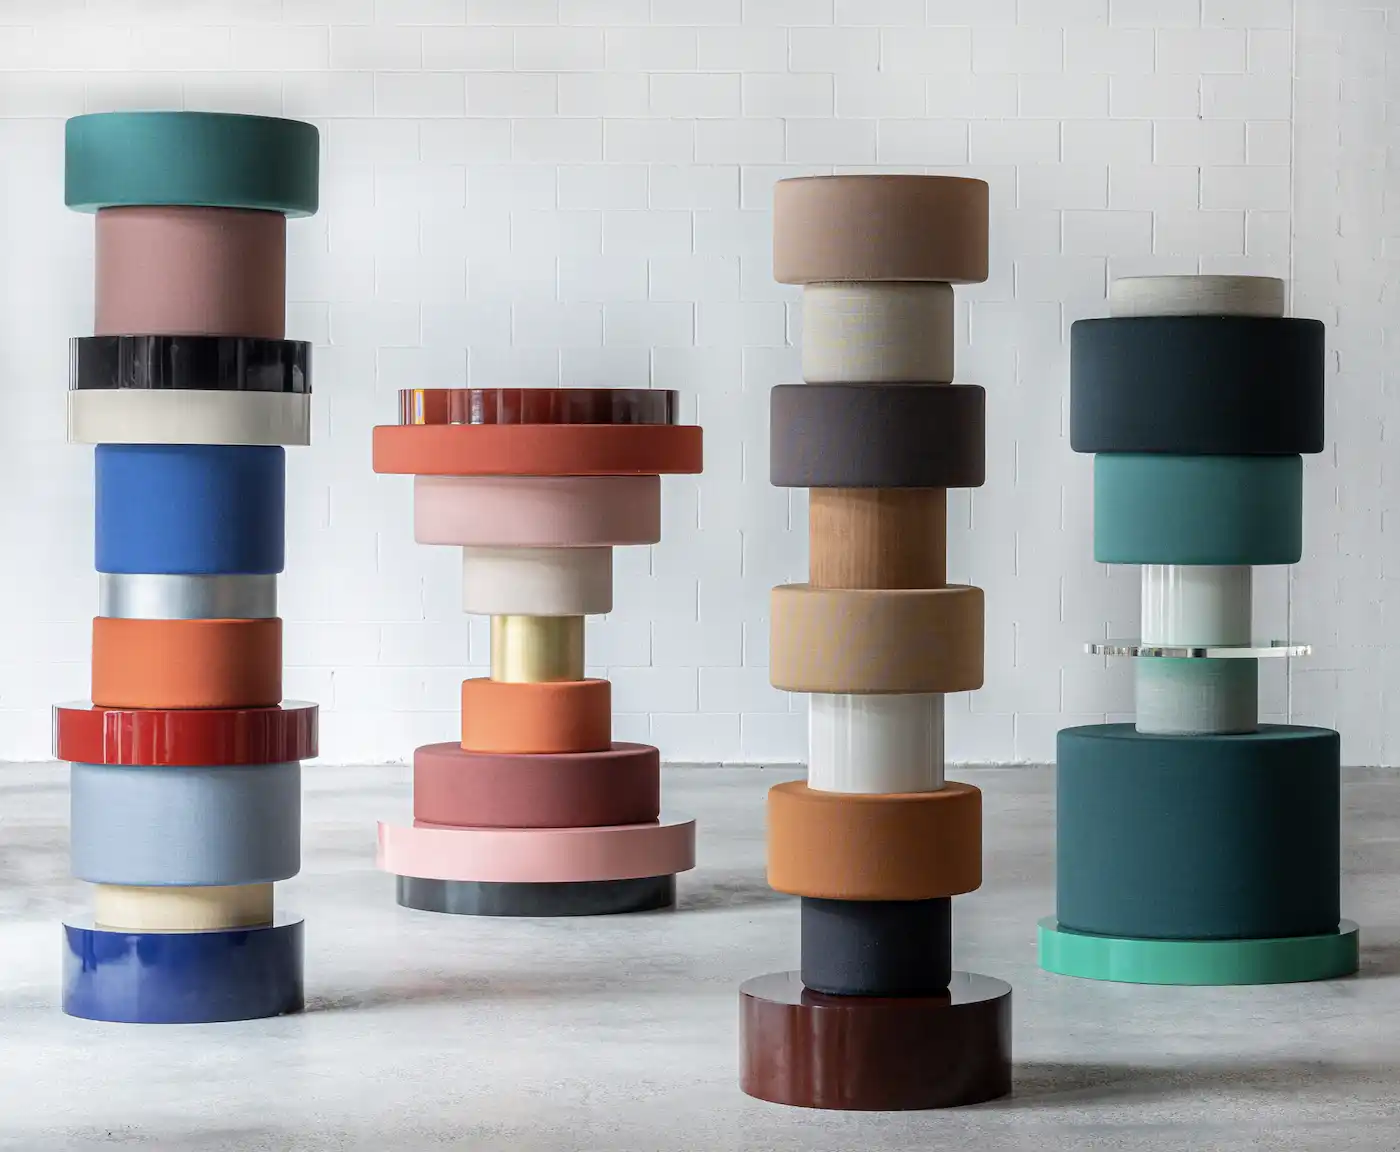 Totems by Doshi Levien.